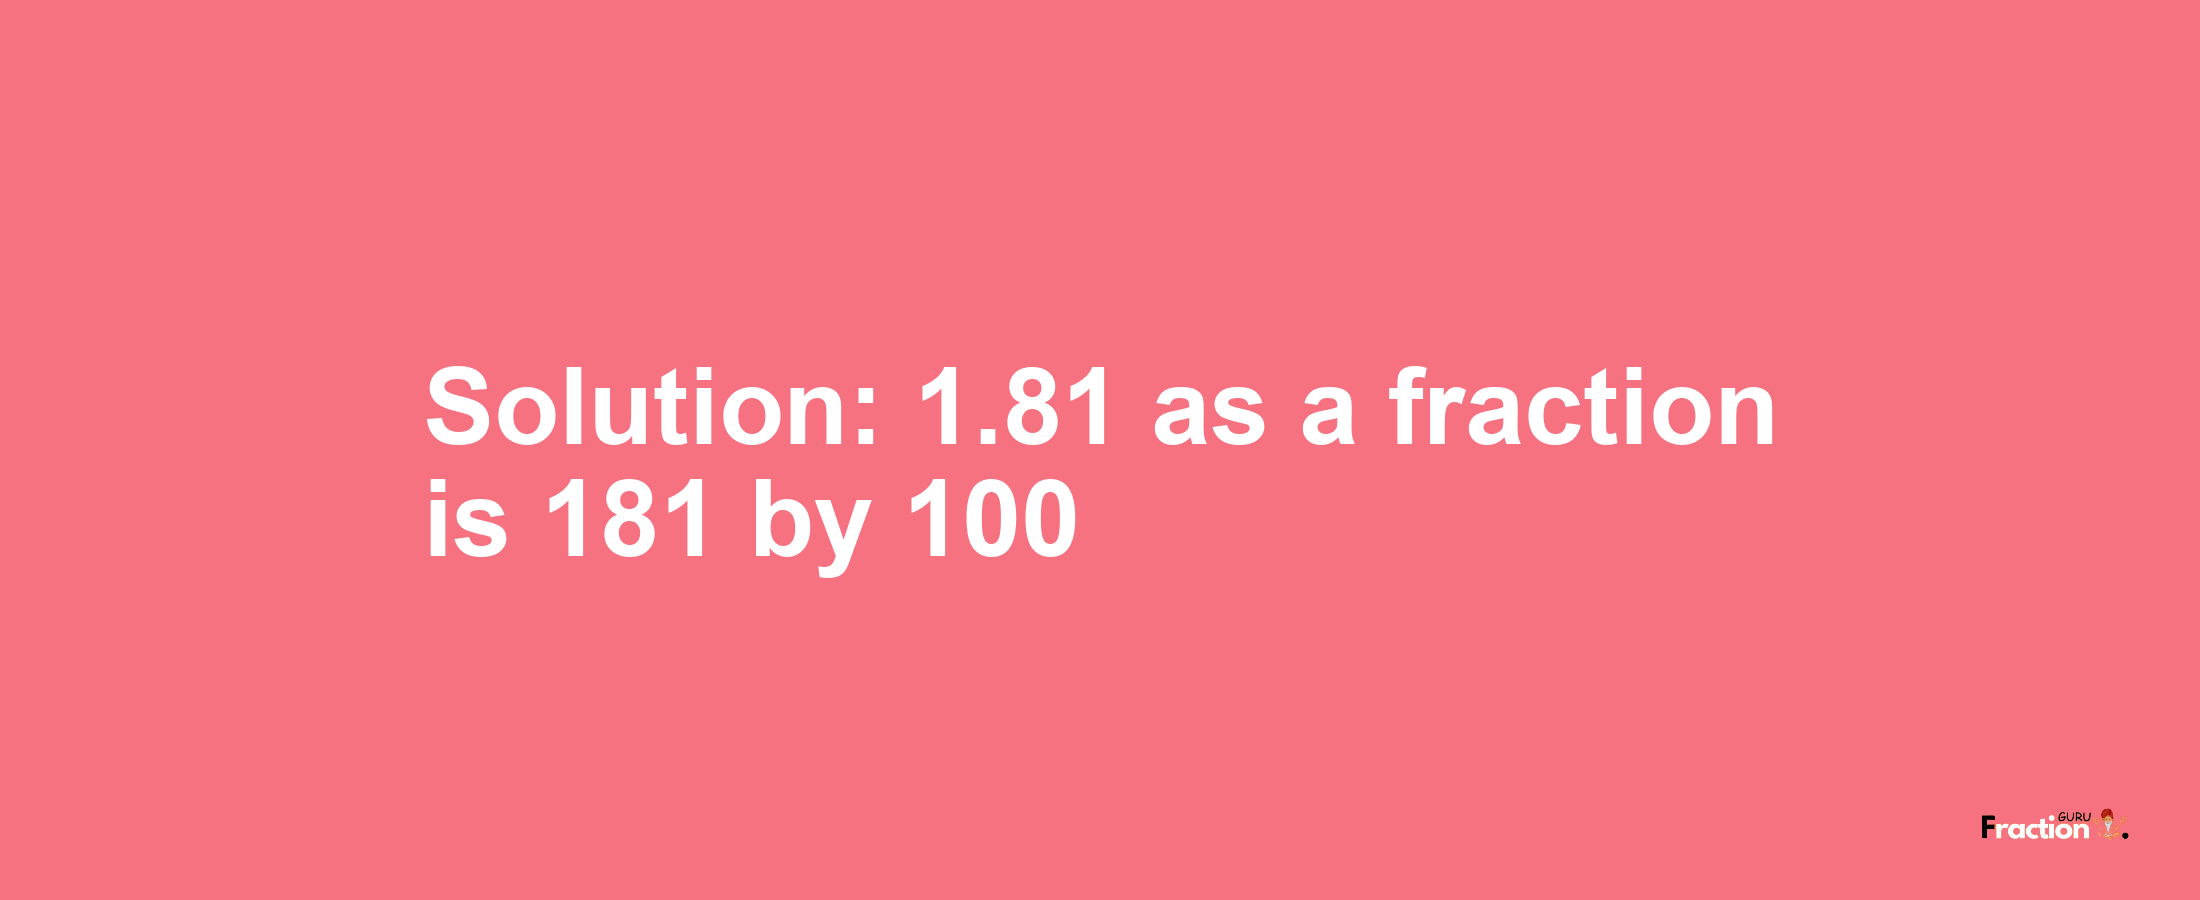 Solution:1.81 as a fraction is 181/100